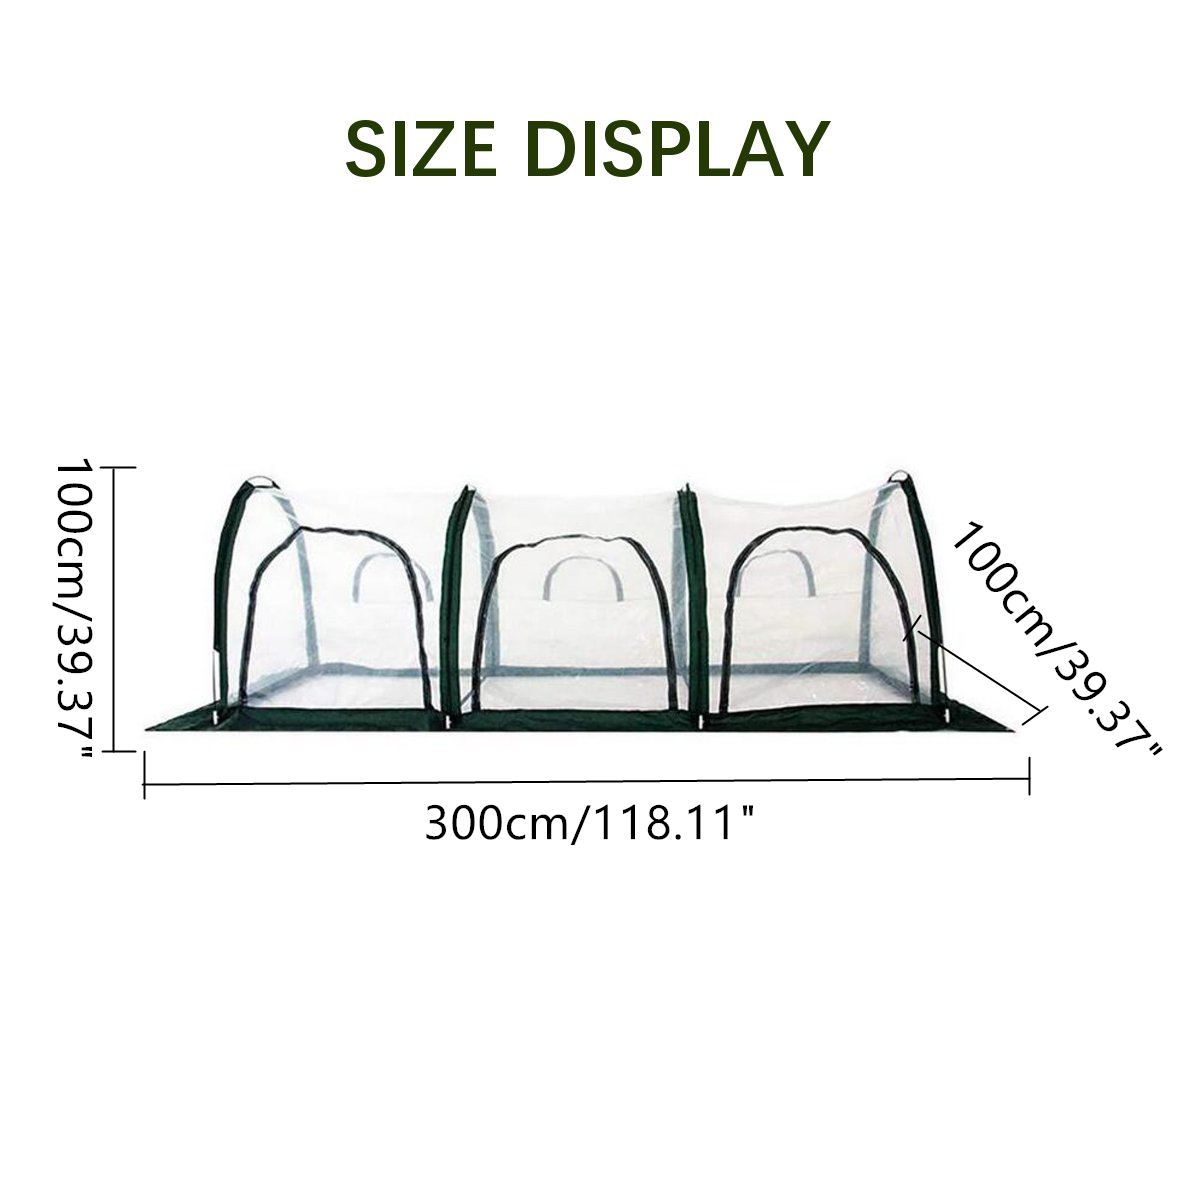 200x100x100cm-PVC-Garden-Greenhouse-Cover-Waterproof-Protects-Plants-Flowers-Planting-Heat-Proof-Col-1712540-4